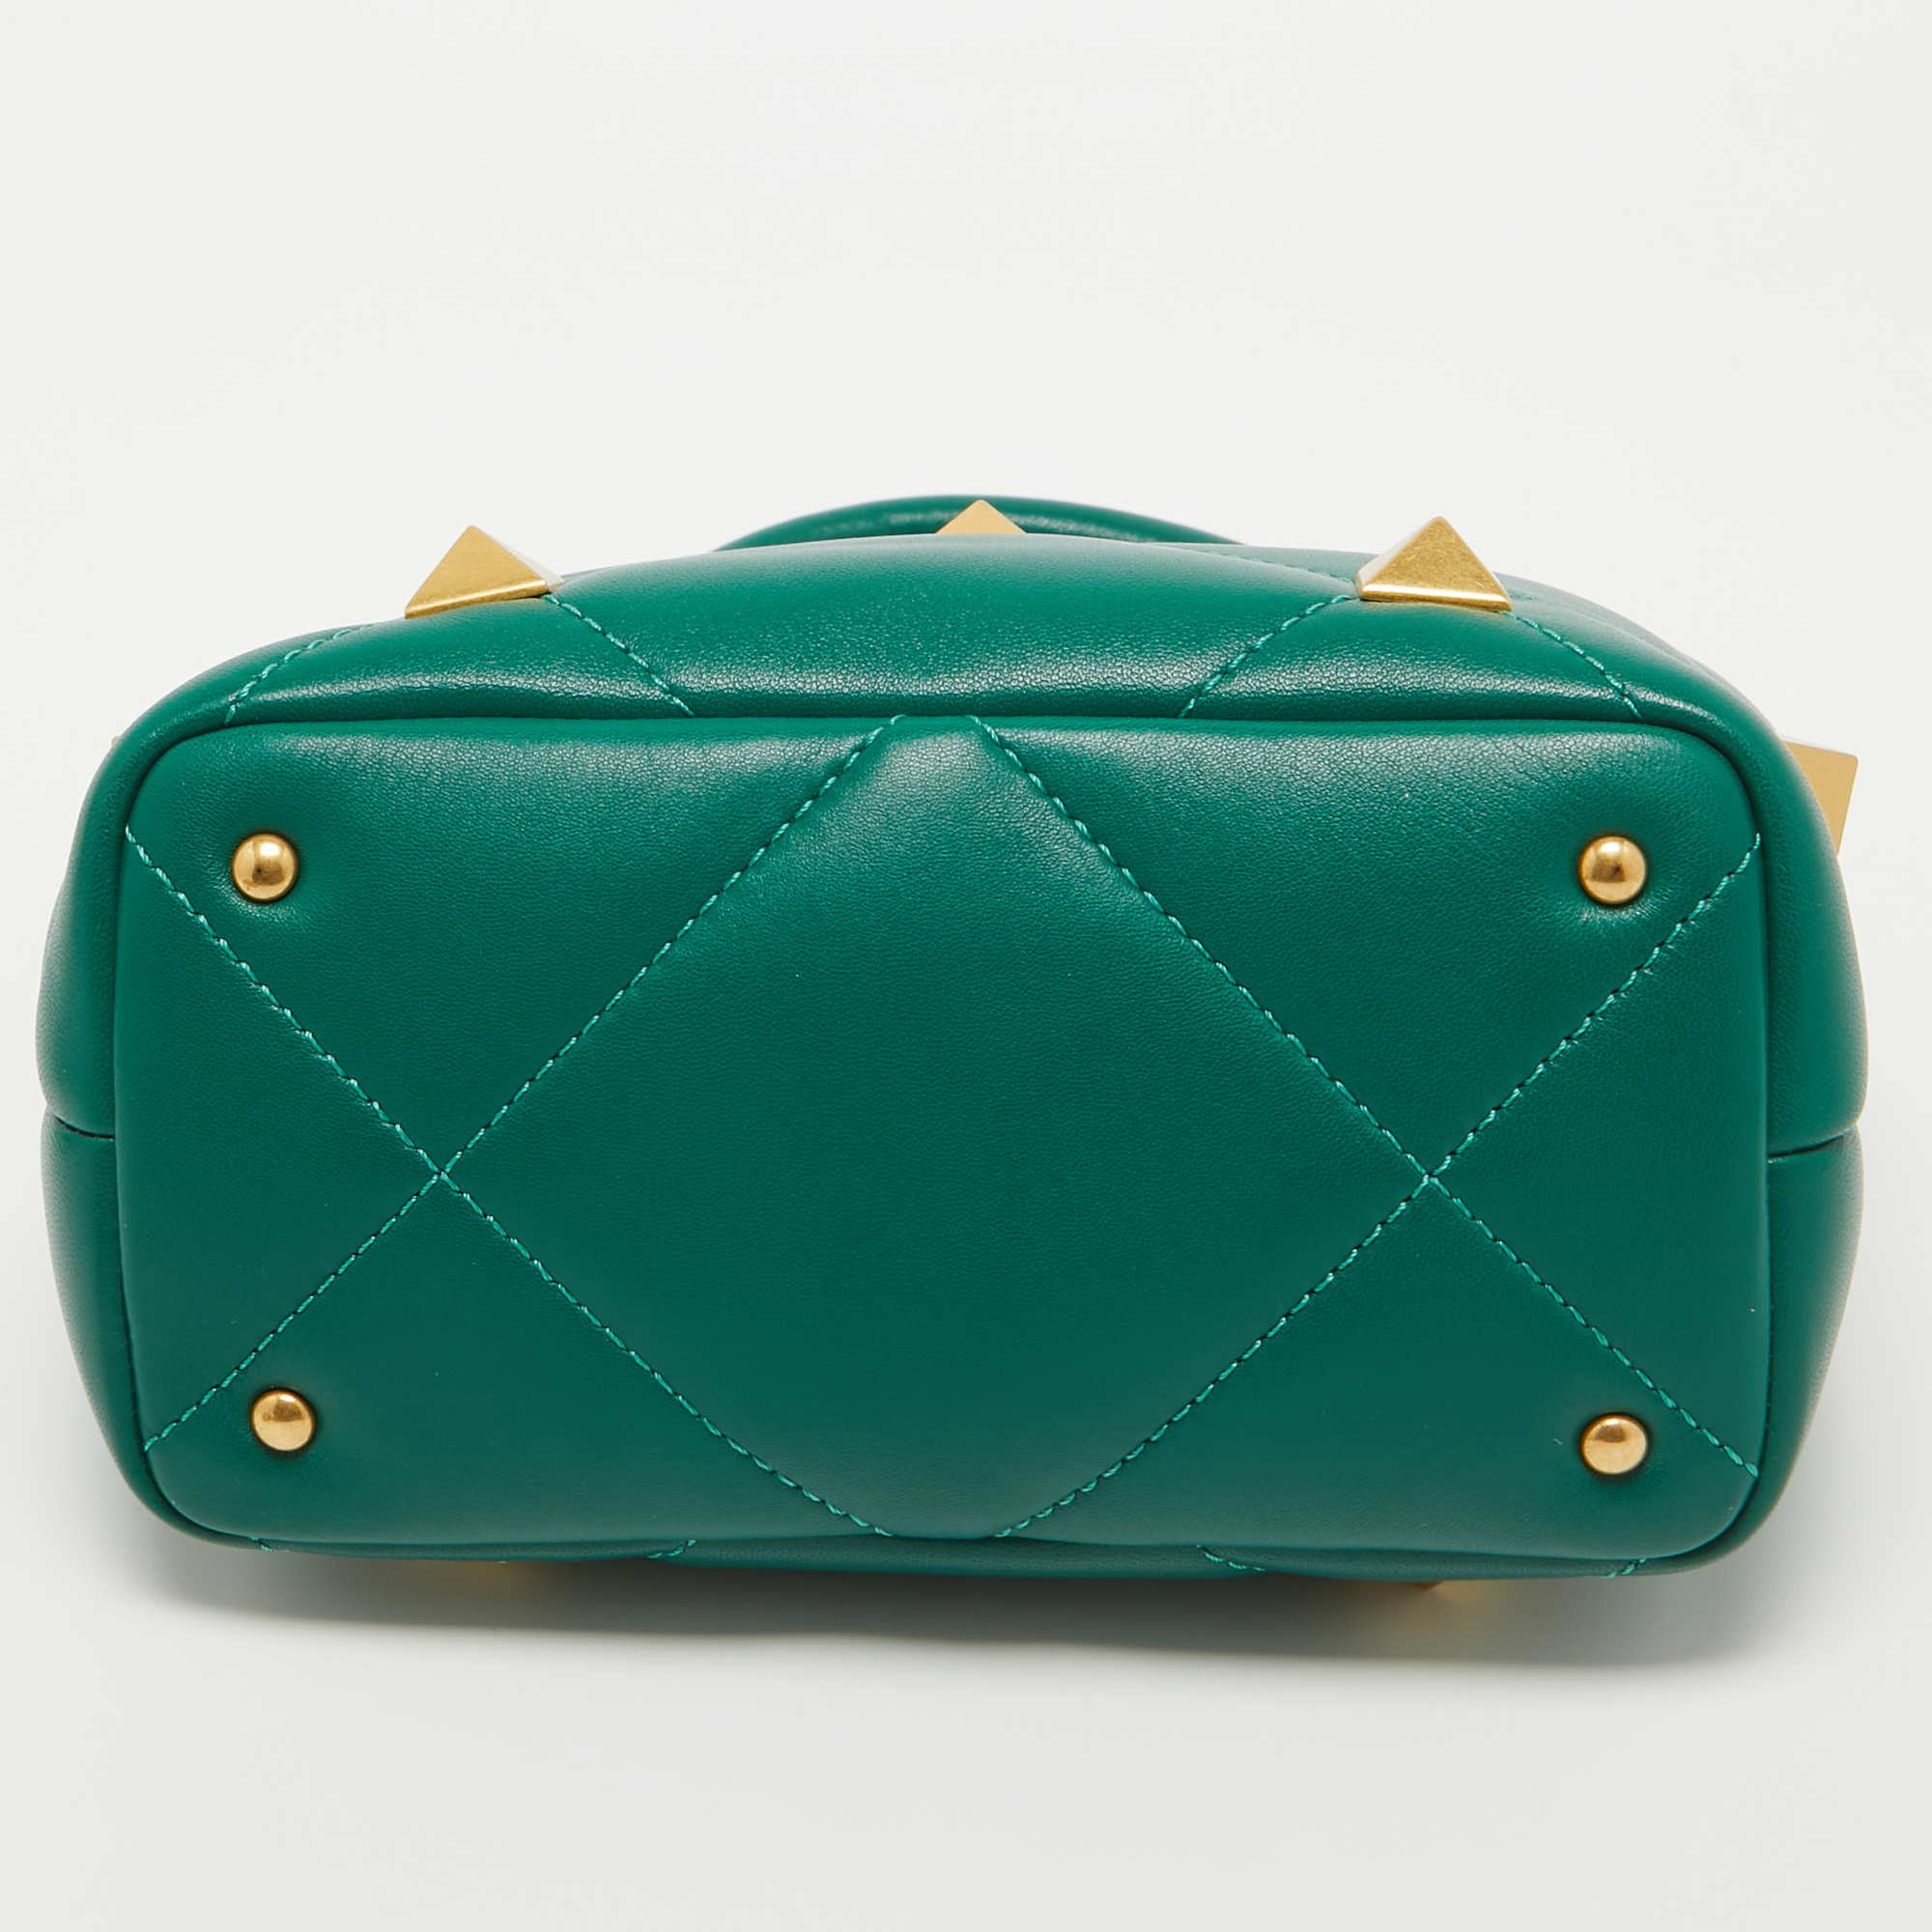 Valentino Green Quilted Leather Small Roman Stud Top Handle Bag